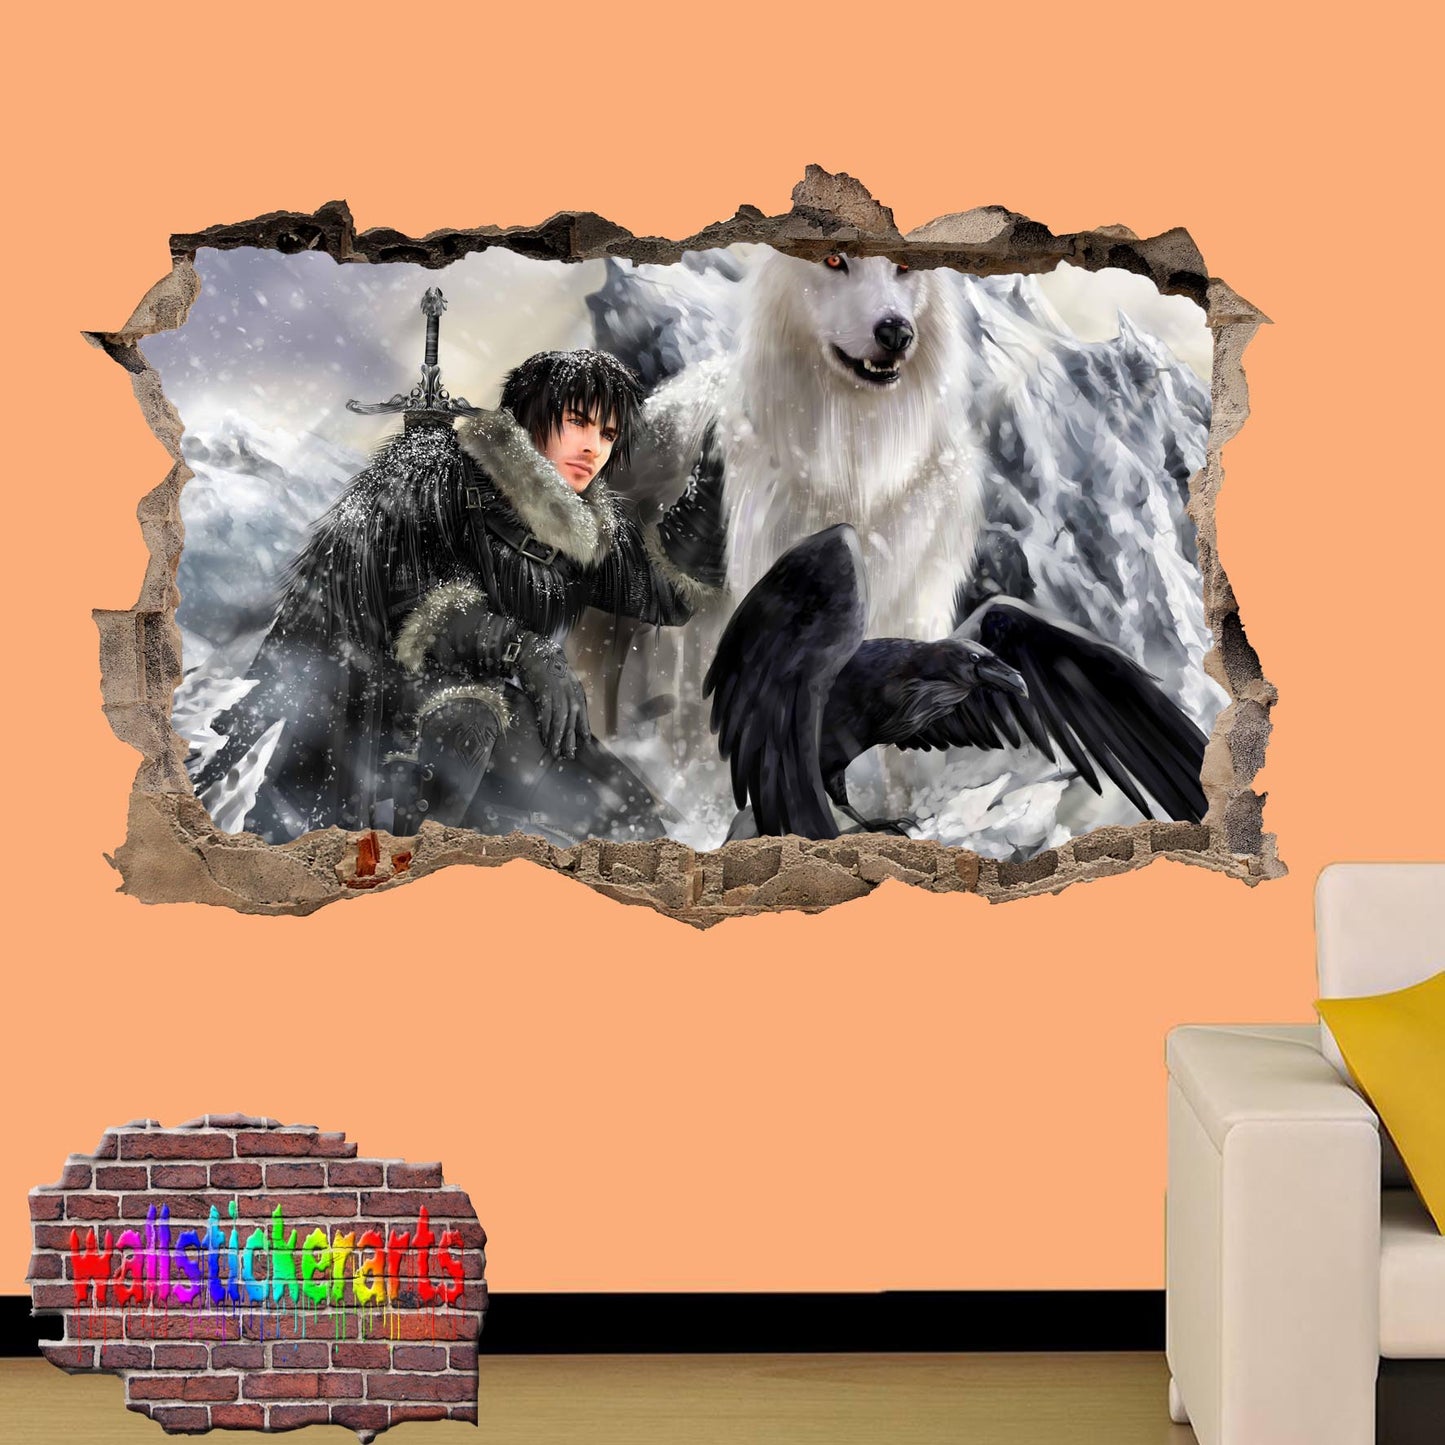 Game of Thrones Character Bran Stark wall sticker poster decal mural